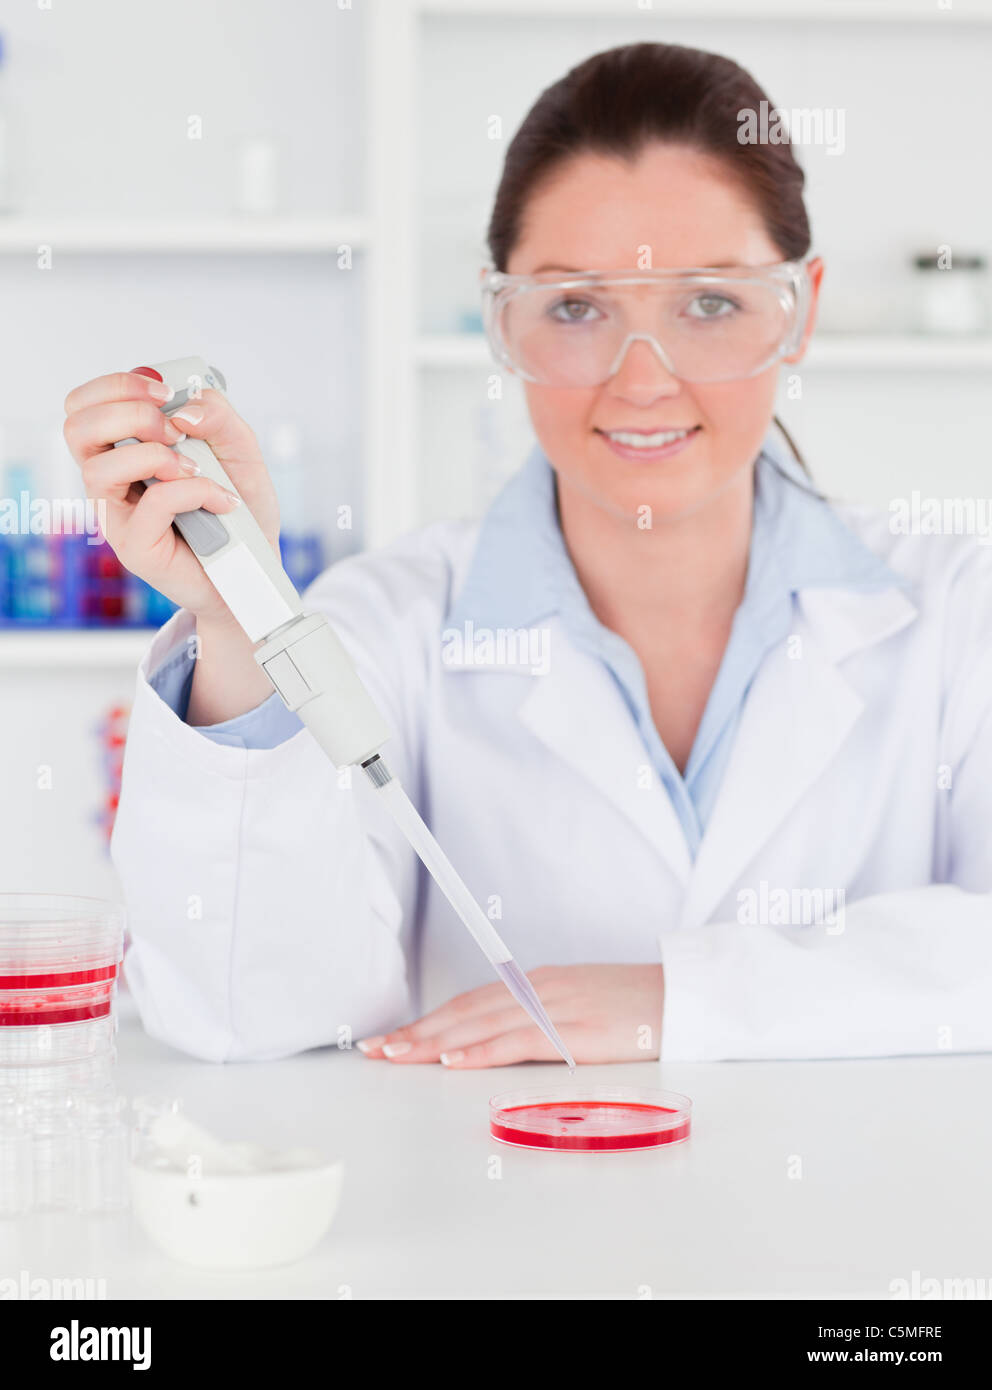 Portrait of a young scientist  preparing a sample Stock Photo